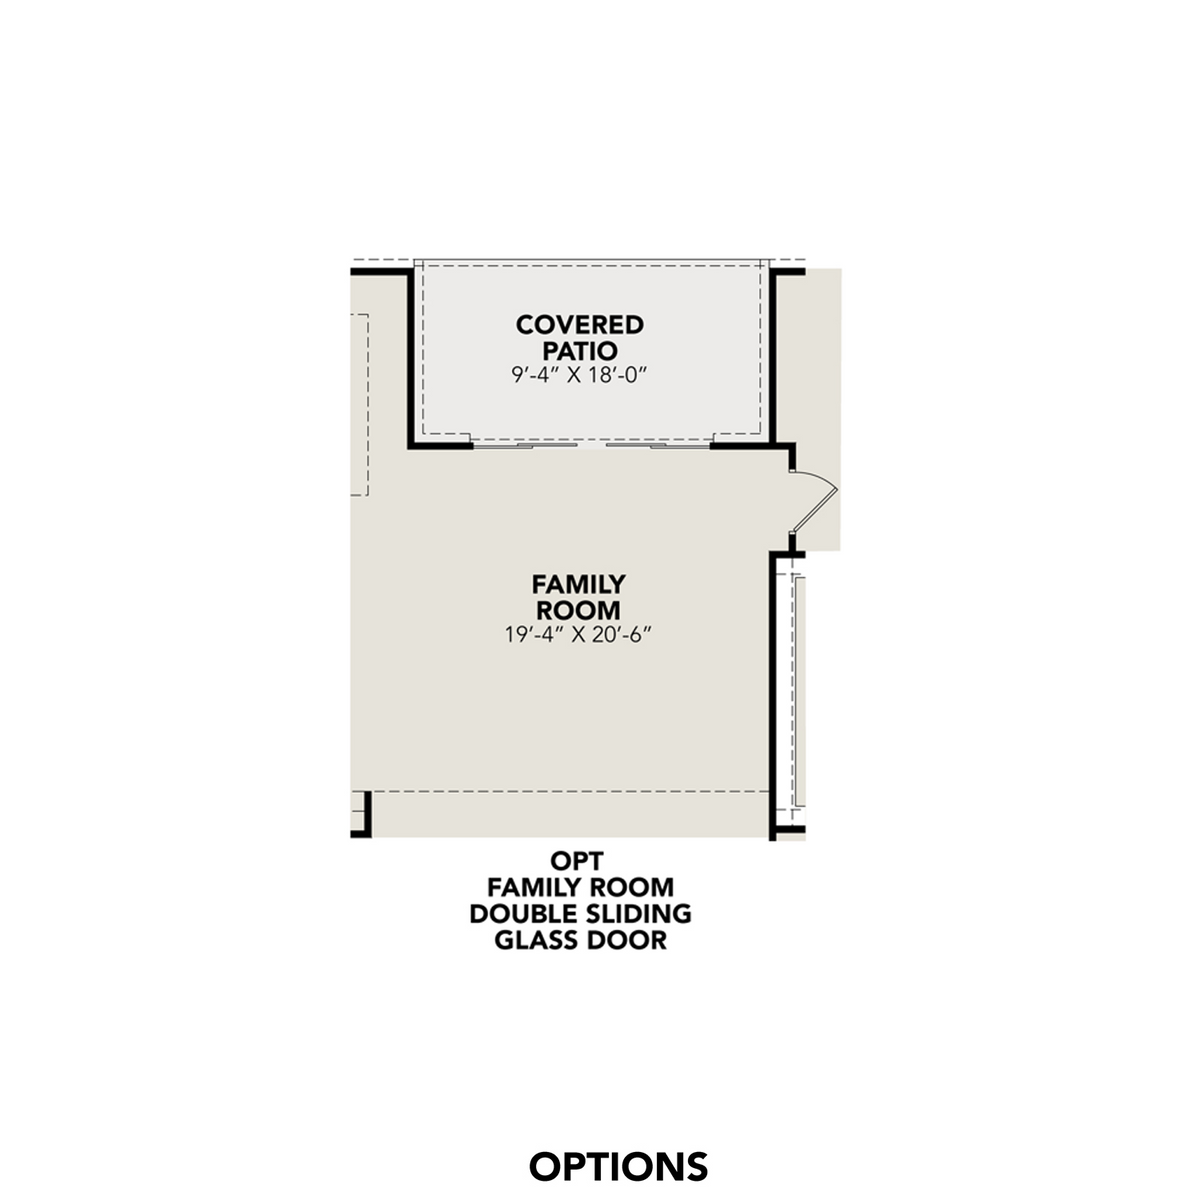 5 - The Jennings H buildable floor plan layout in Davidson Homes' The Reserve at Potranco Oaks community.